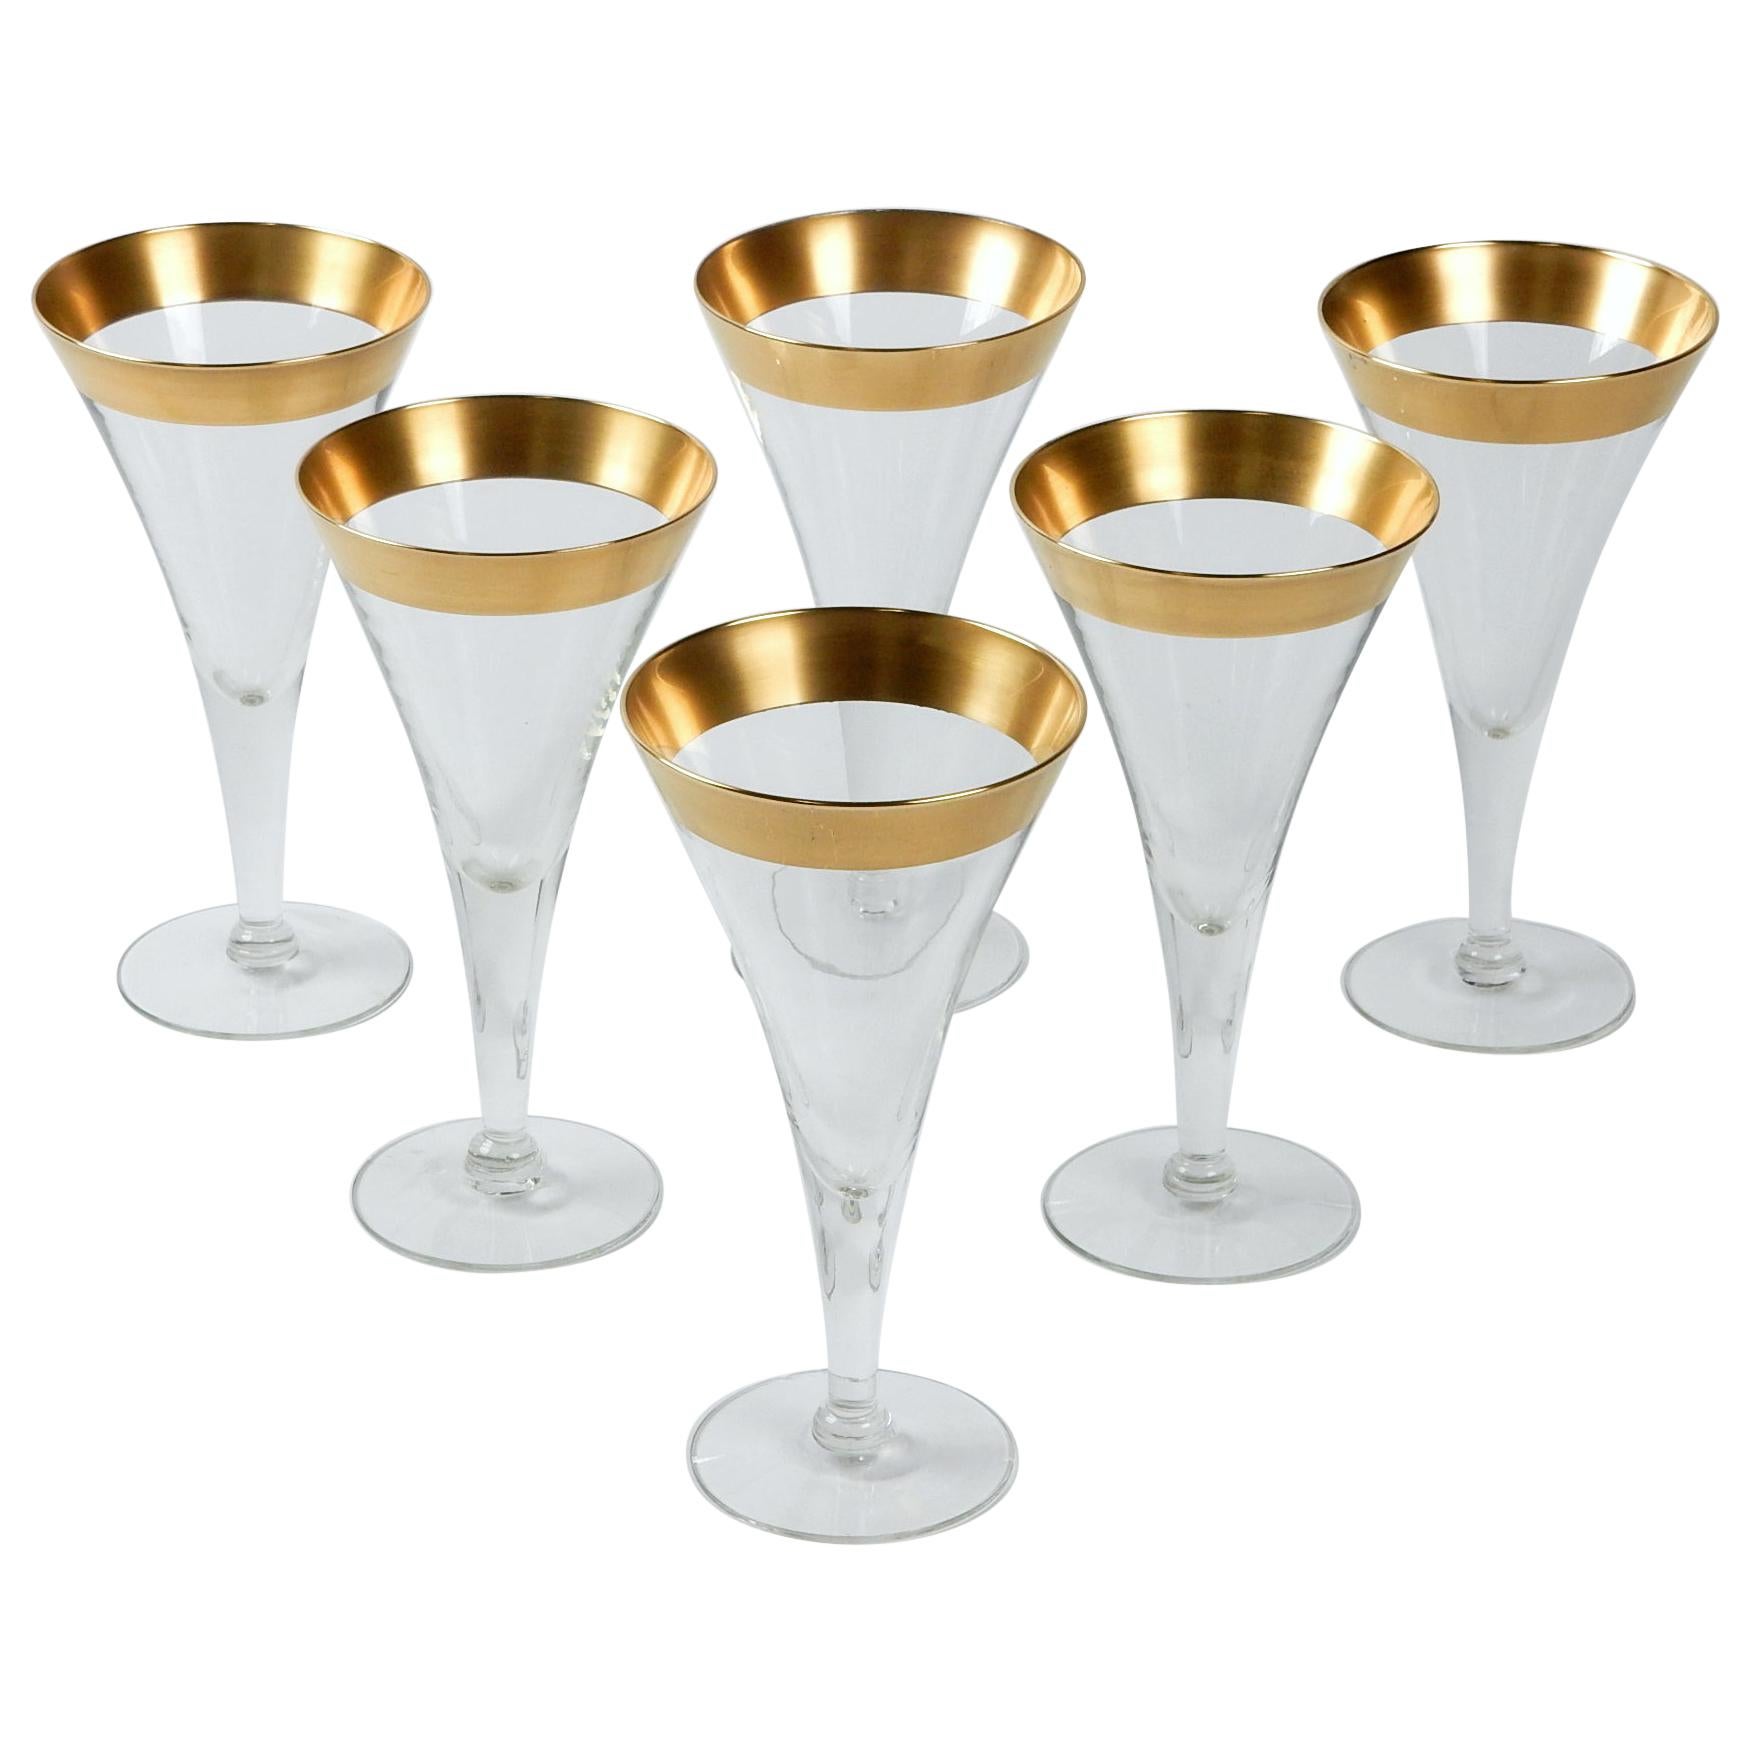 Fabulous set of 6 authentic Dorothy Thorpe design tall martini glass set
with 1